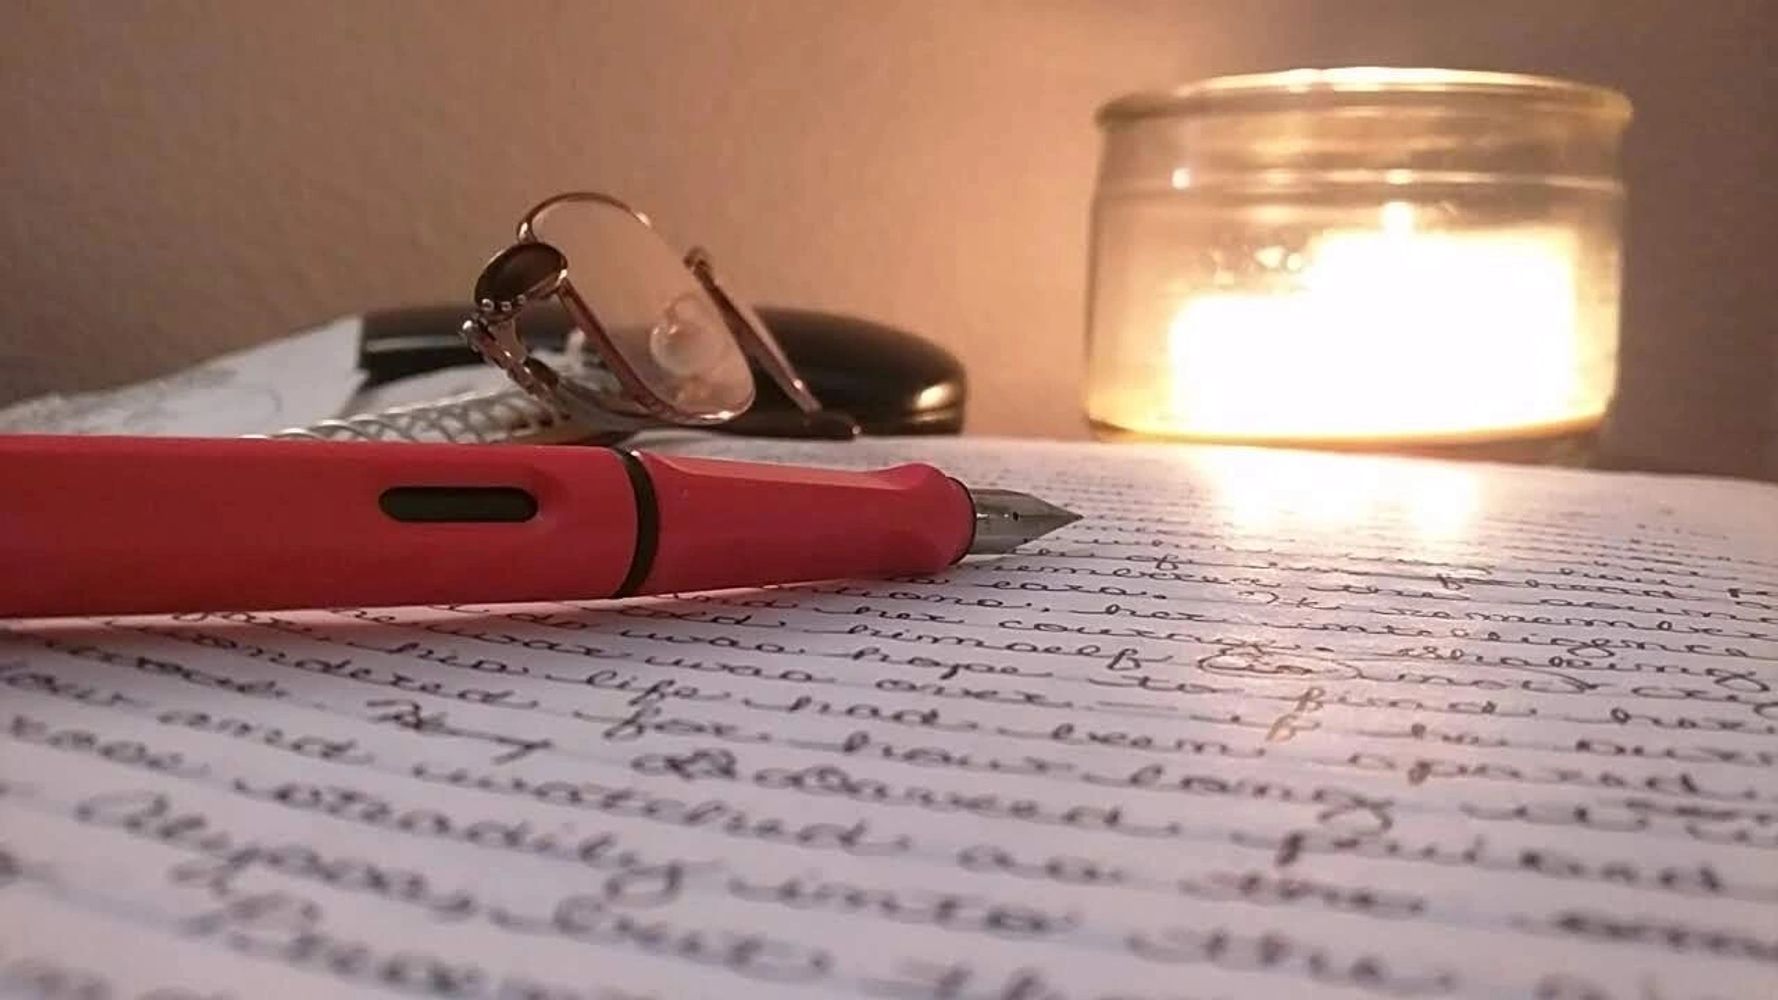 A fountain pen resting on a manuscript, lit by candlelight.